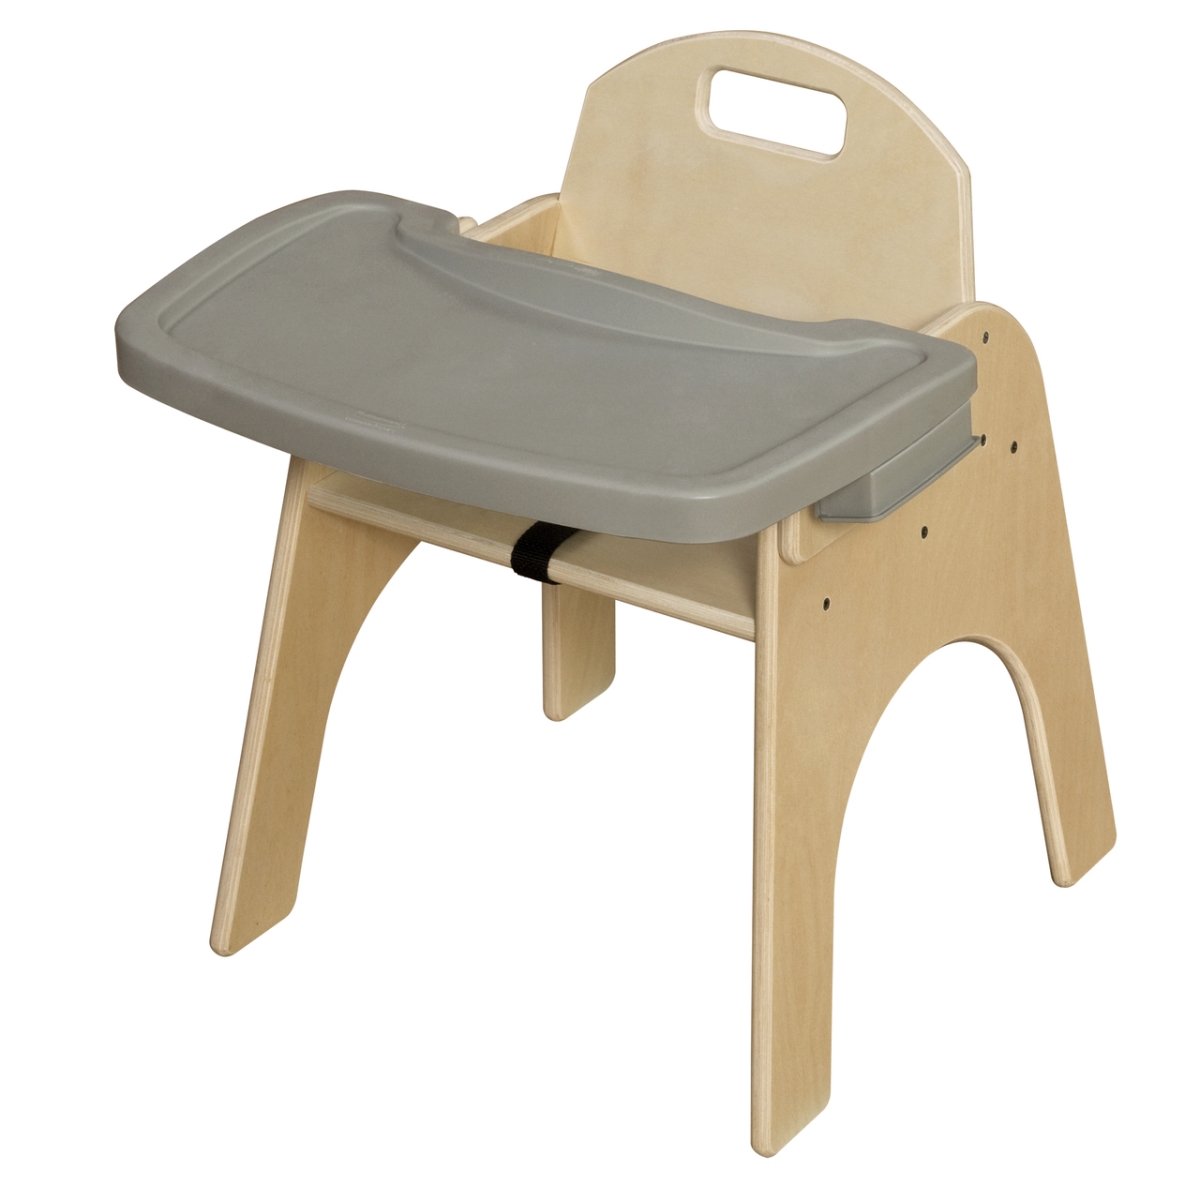 13 In. Seat Height Woodie With Adjustable Tray